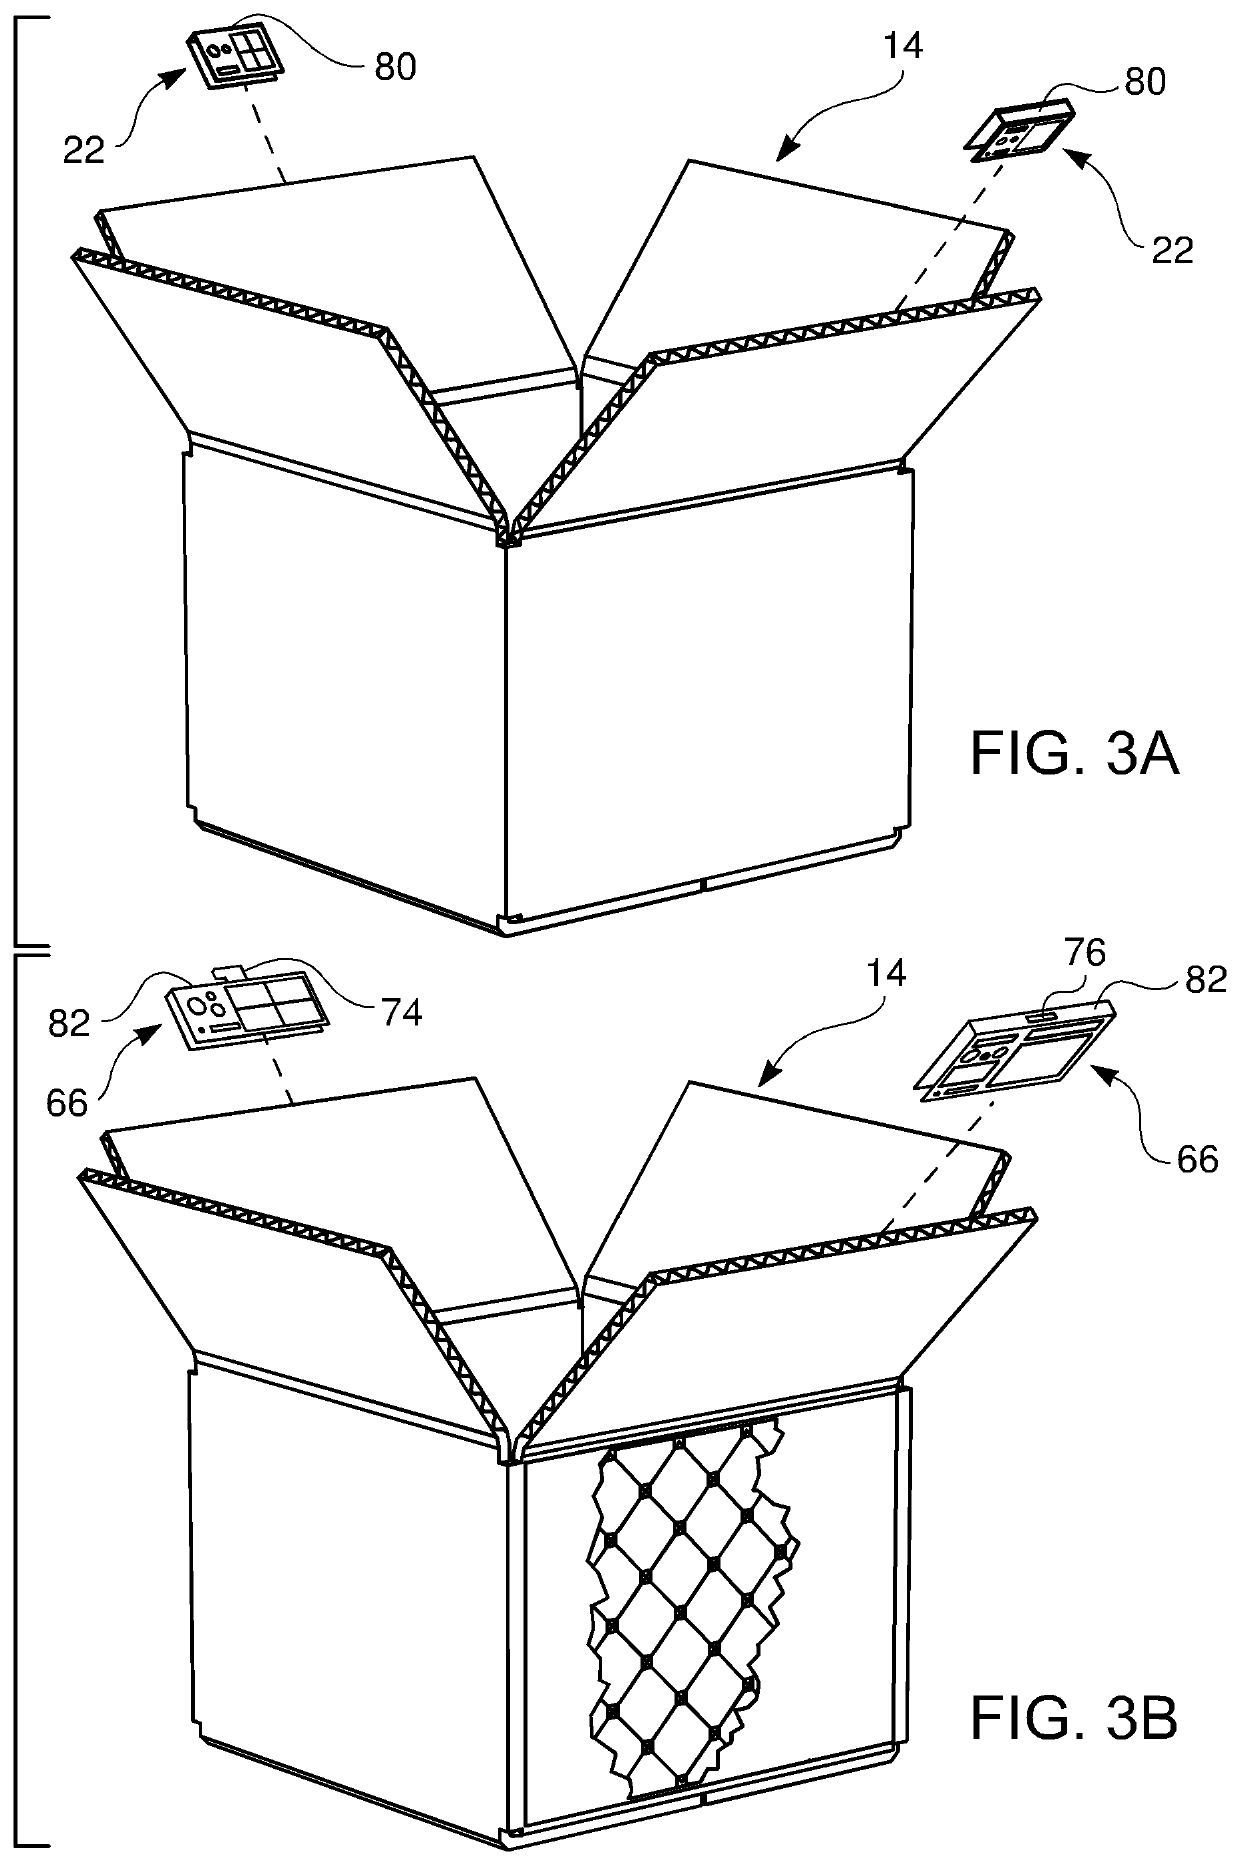 Shipping package tracking or monitoring system and method